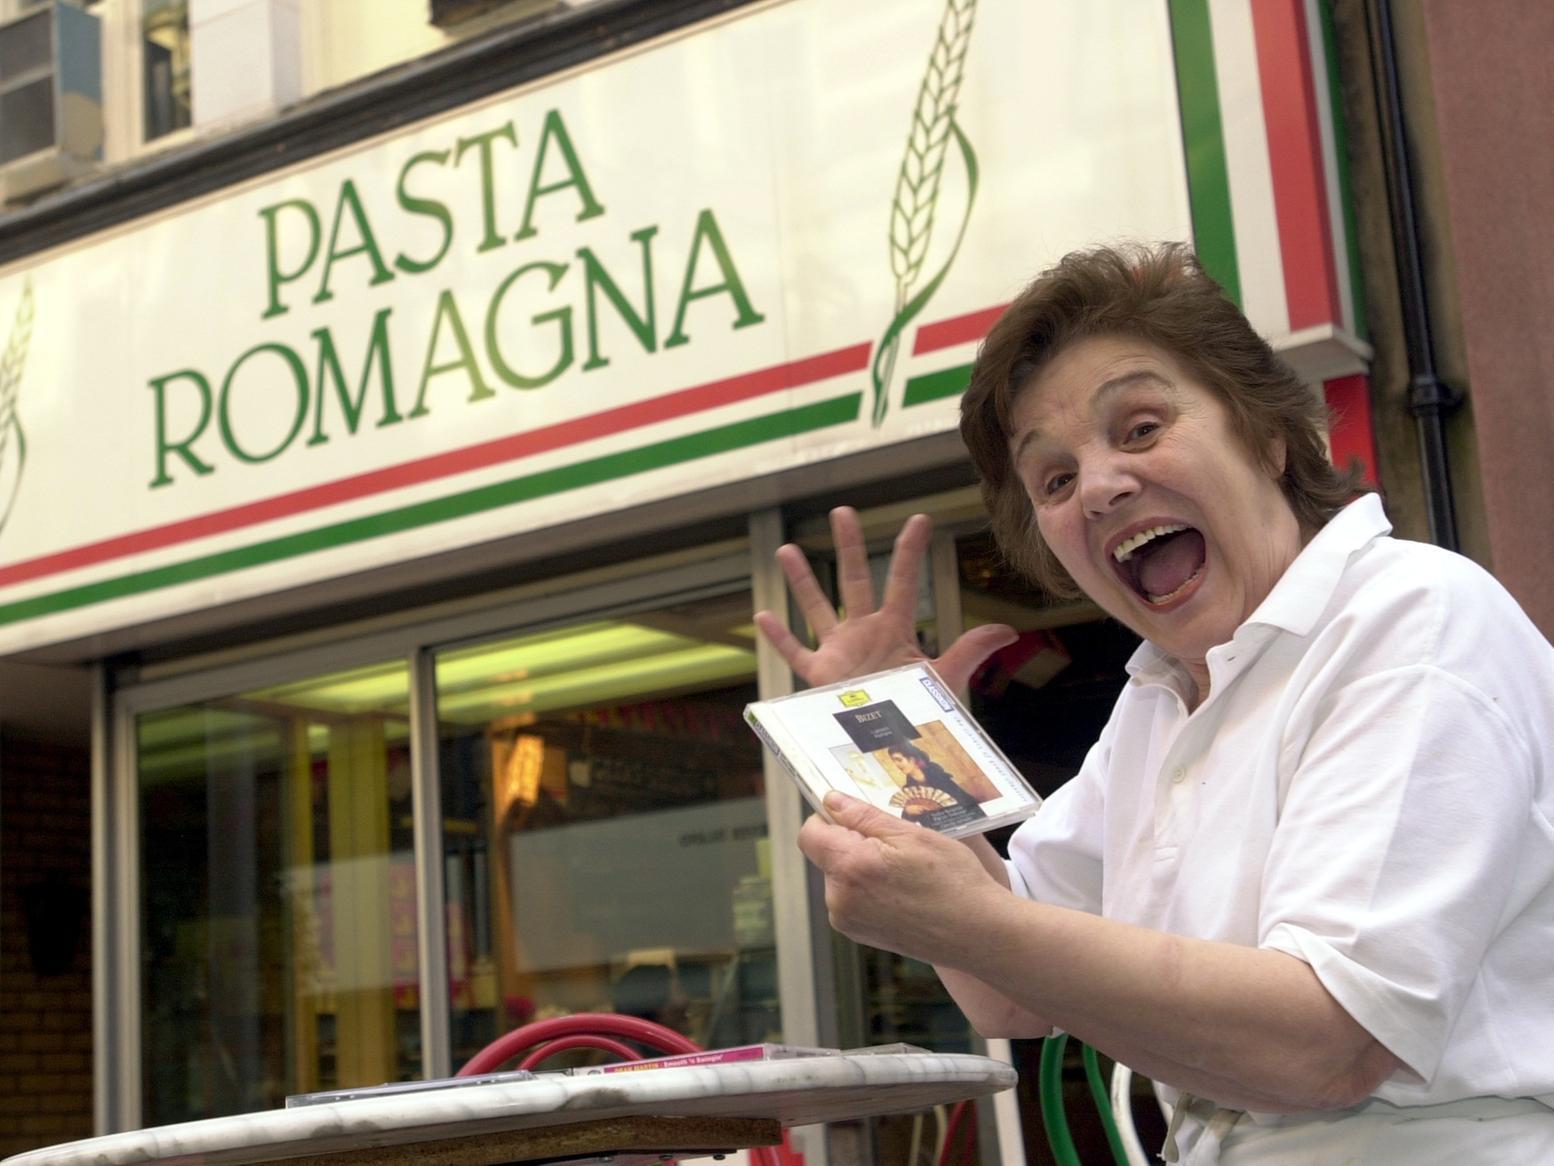 Gilda Porcelli who ran the Pasta Romagna restaurant in the city centre, was given a warning letter from council chiefs for singing and playing music too loud which was disturbing passers-by.